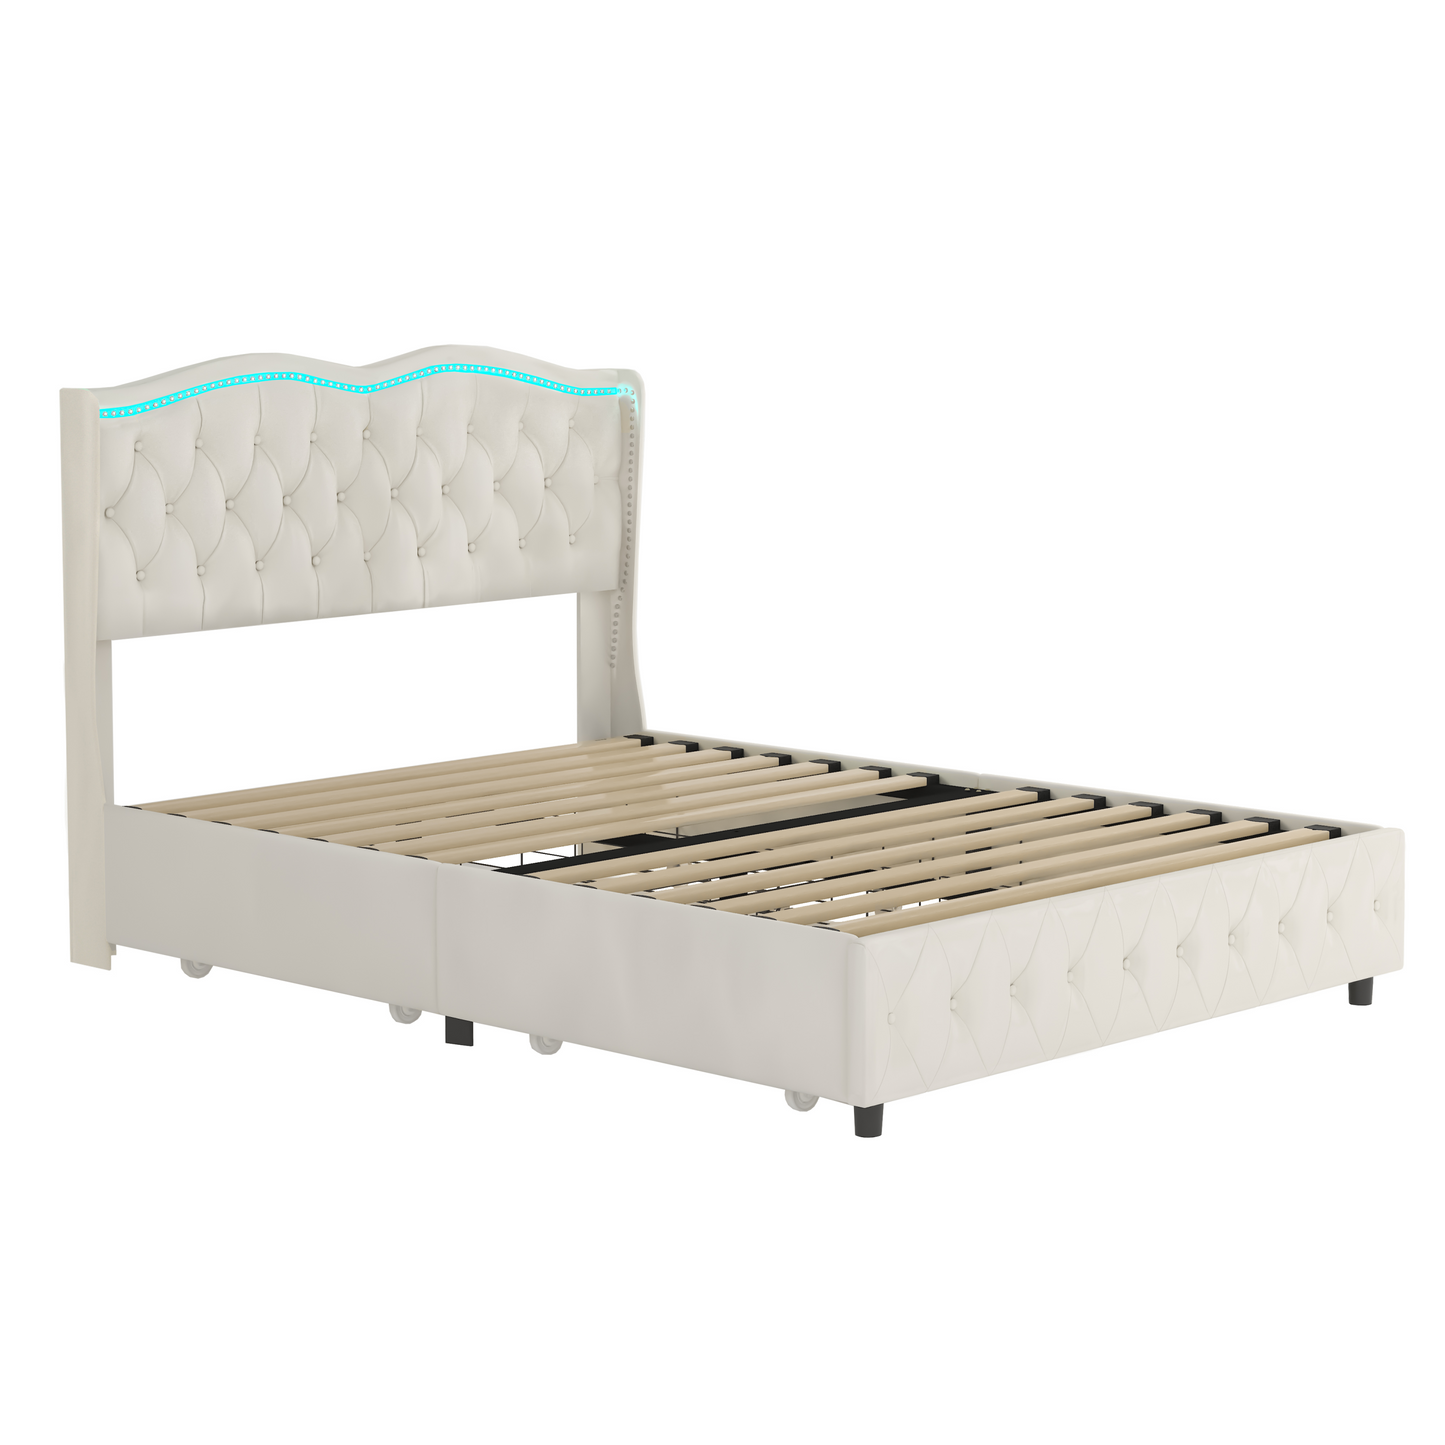 Queen Platform Bed Frame , Velvet Upholstered Bed with Deep Tufted Buttons and Nailhead Trim, Adjustable Colorful LED Light Decorative Headboard, Bed Sides with Pull-Out Storage 4 Drawers, Beige